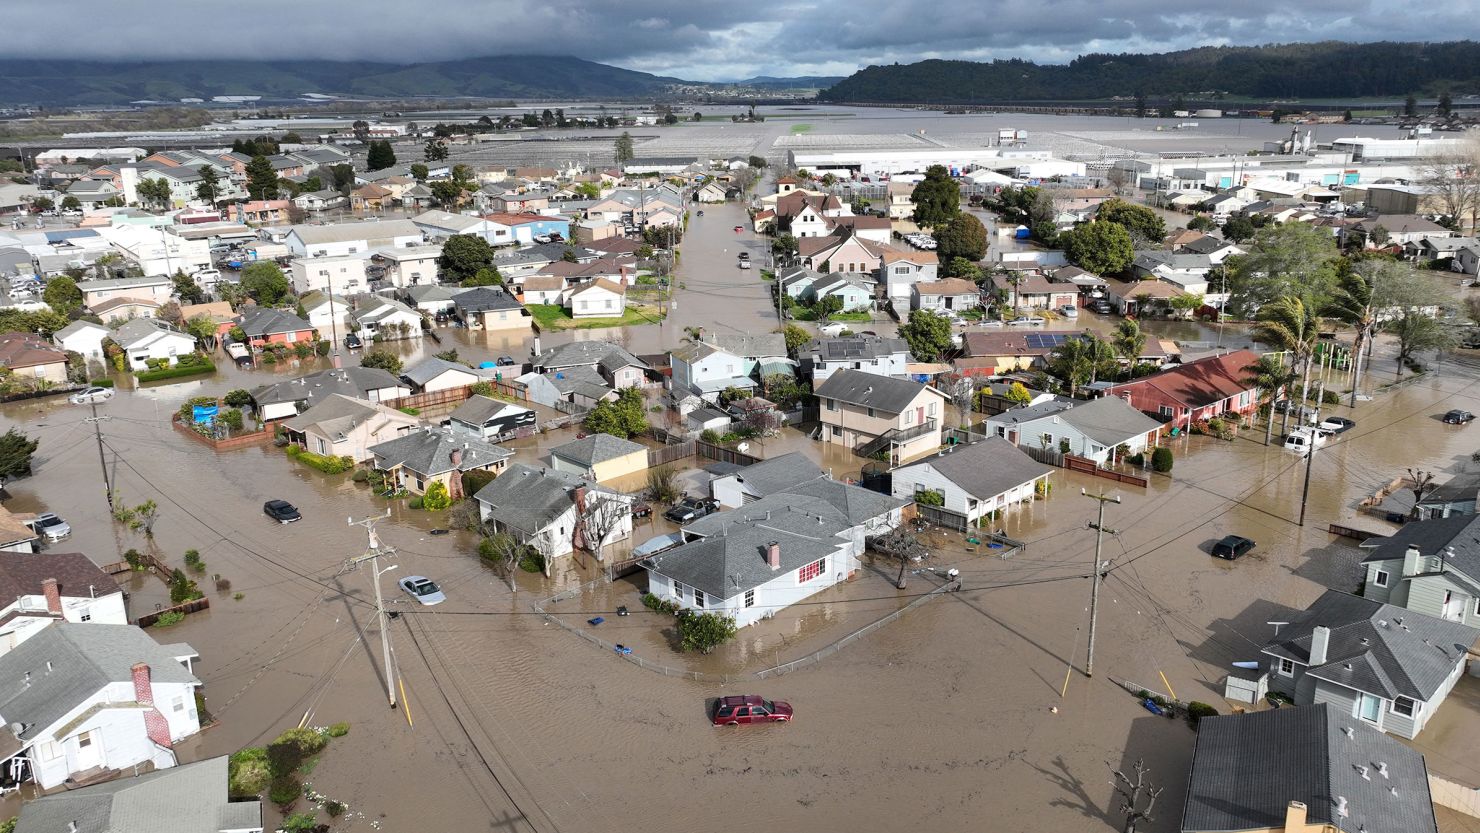 Vehicles and homes engulfed by floodwaters in Pajaro, California, on Saturday, March 11, 2023, after an atmospheric river dumped torrential rain on the region.